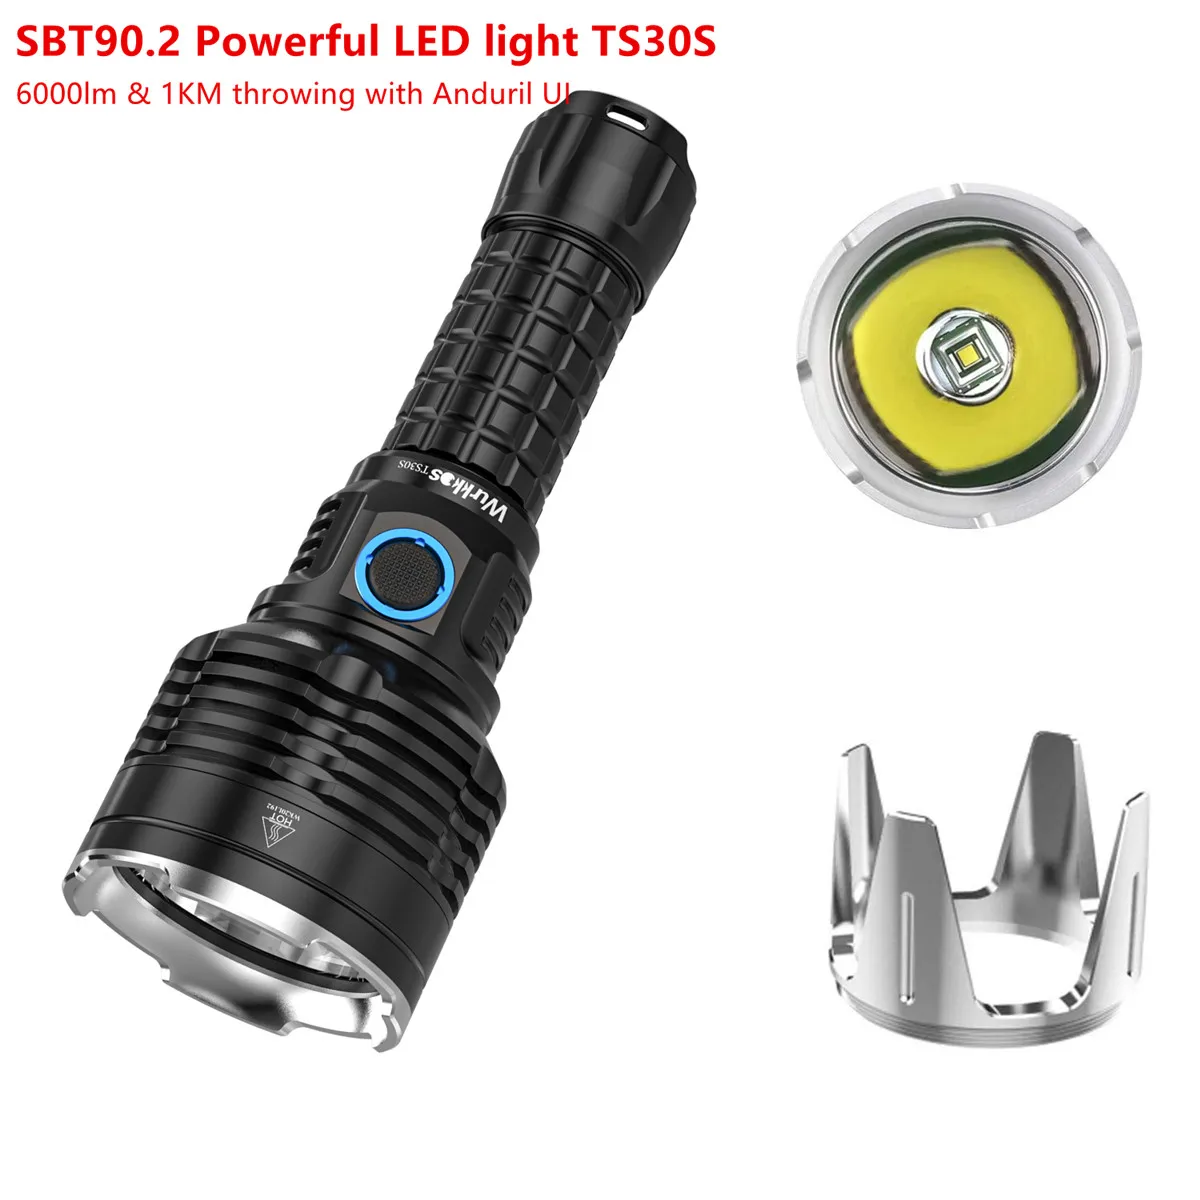 

Wurkkos TS30S USB C Rechargeable 21700 Flashlight SBT90.2 Powerful LED Light 6000lm with Extra Stainless Bezel Anduril Version